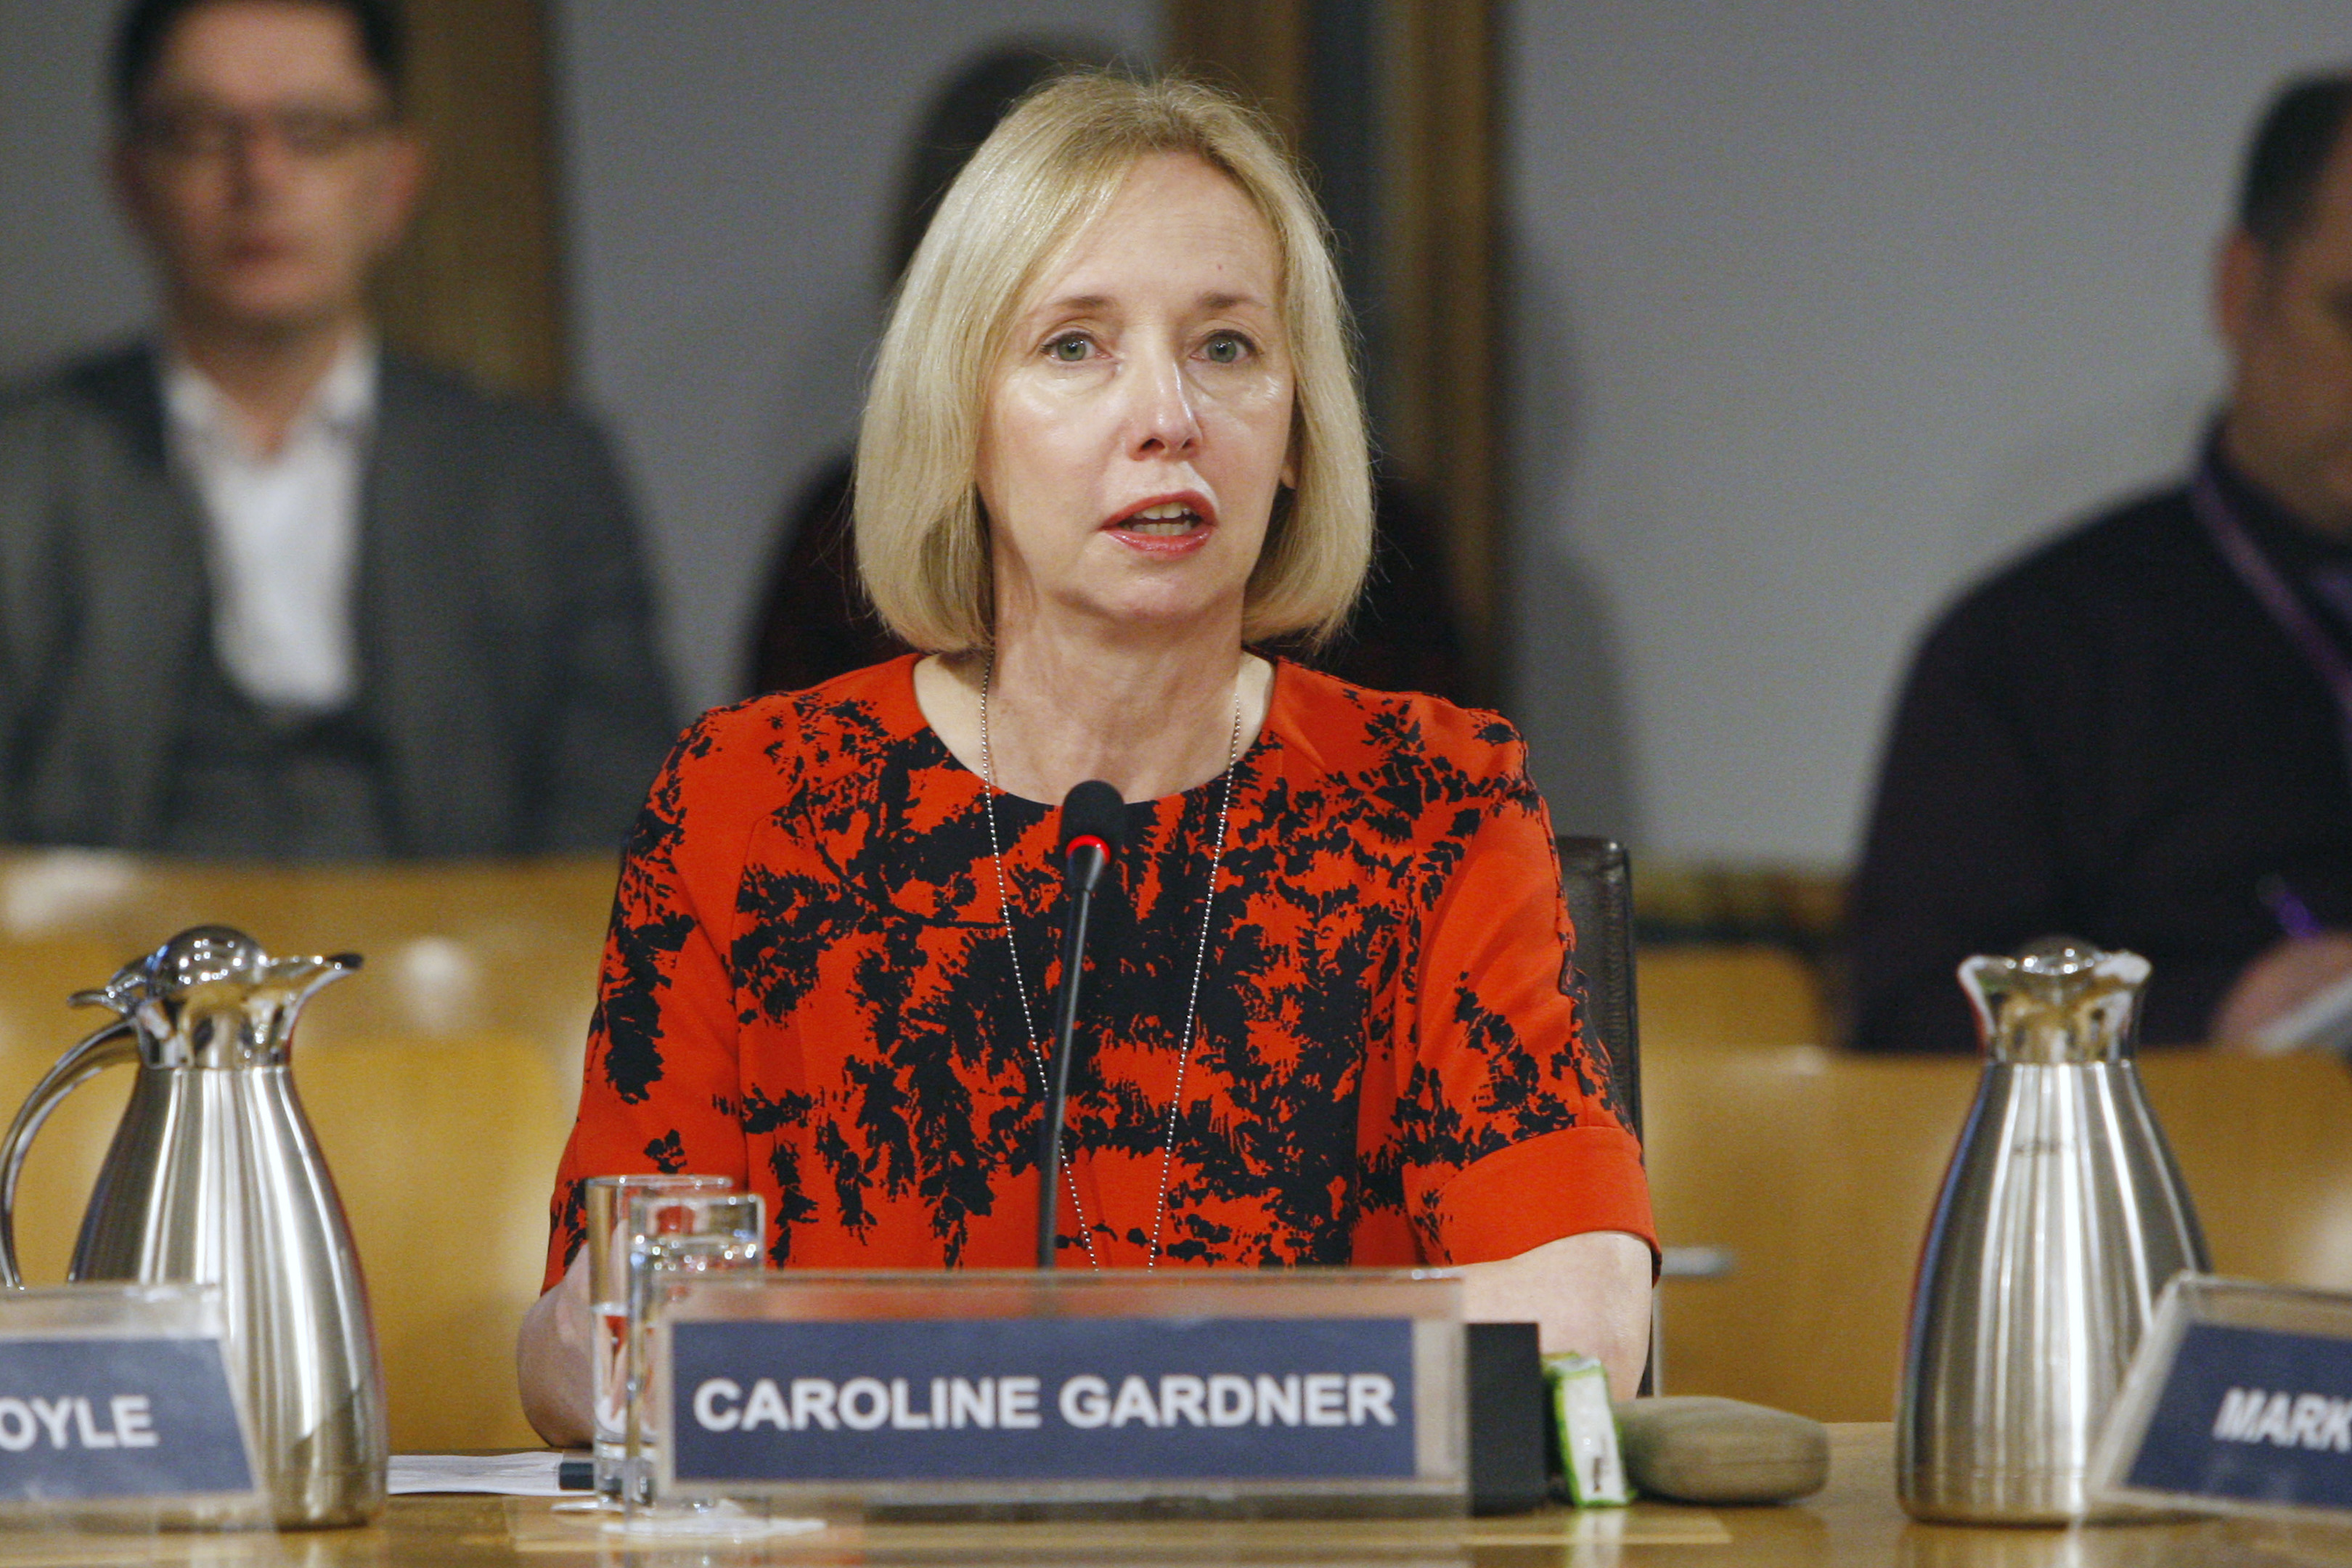 Caroline Gardner, Auditor General for Scotland appears before the Public Audit and Post-legislative Scrutiny Committee to give evidence on The 2016/17 audit of the Scottish Police Authority. (Andrew Cowan/Scottish Parliament)